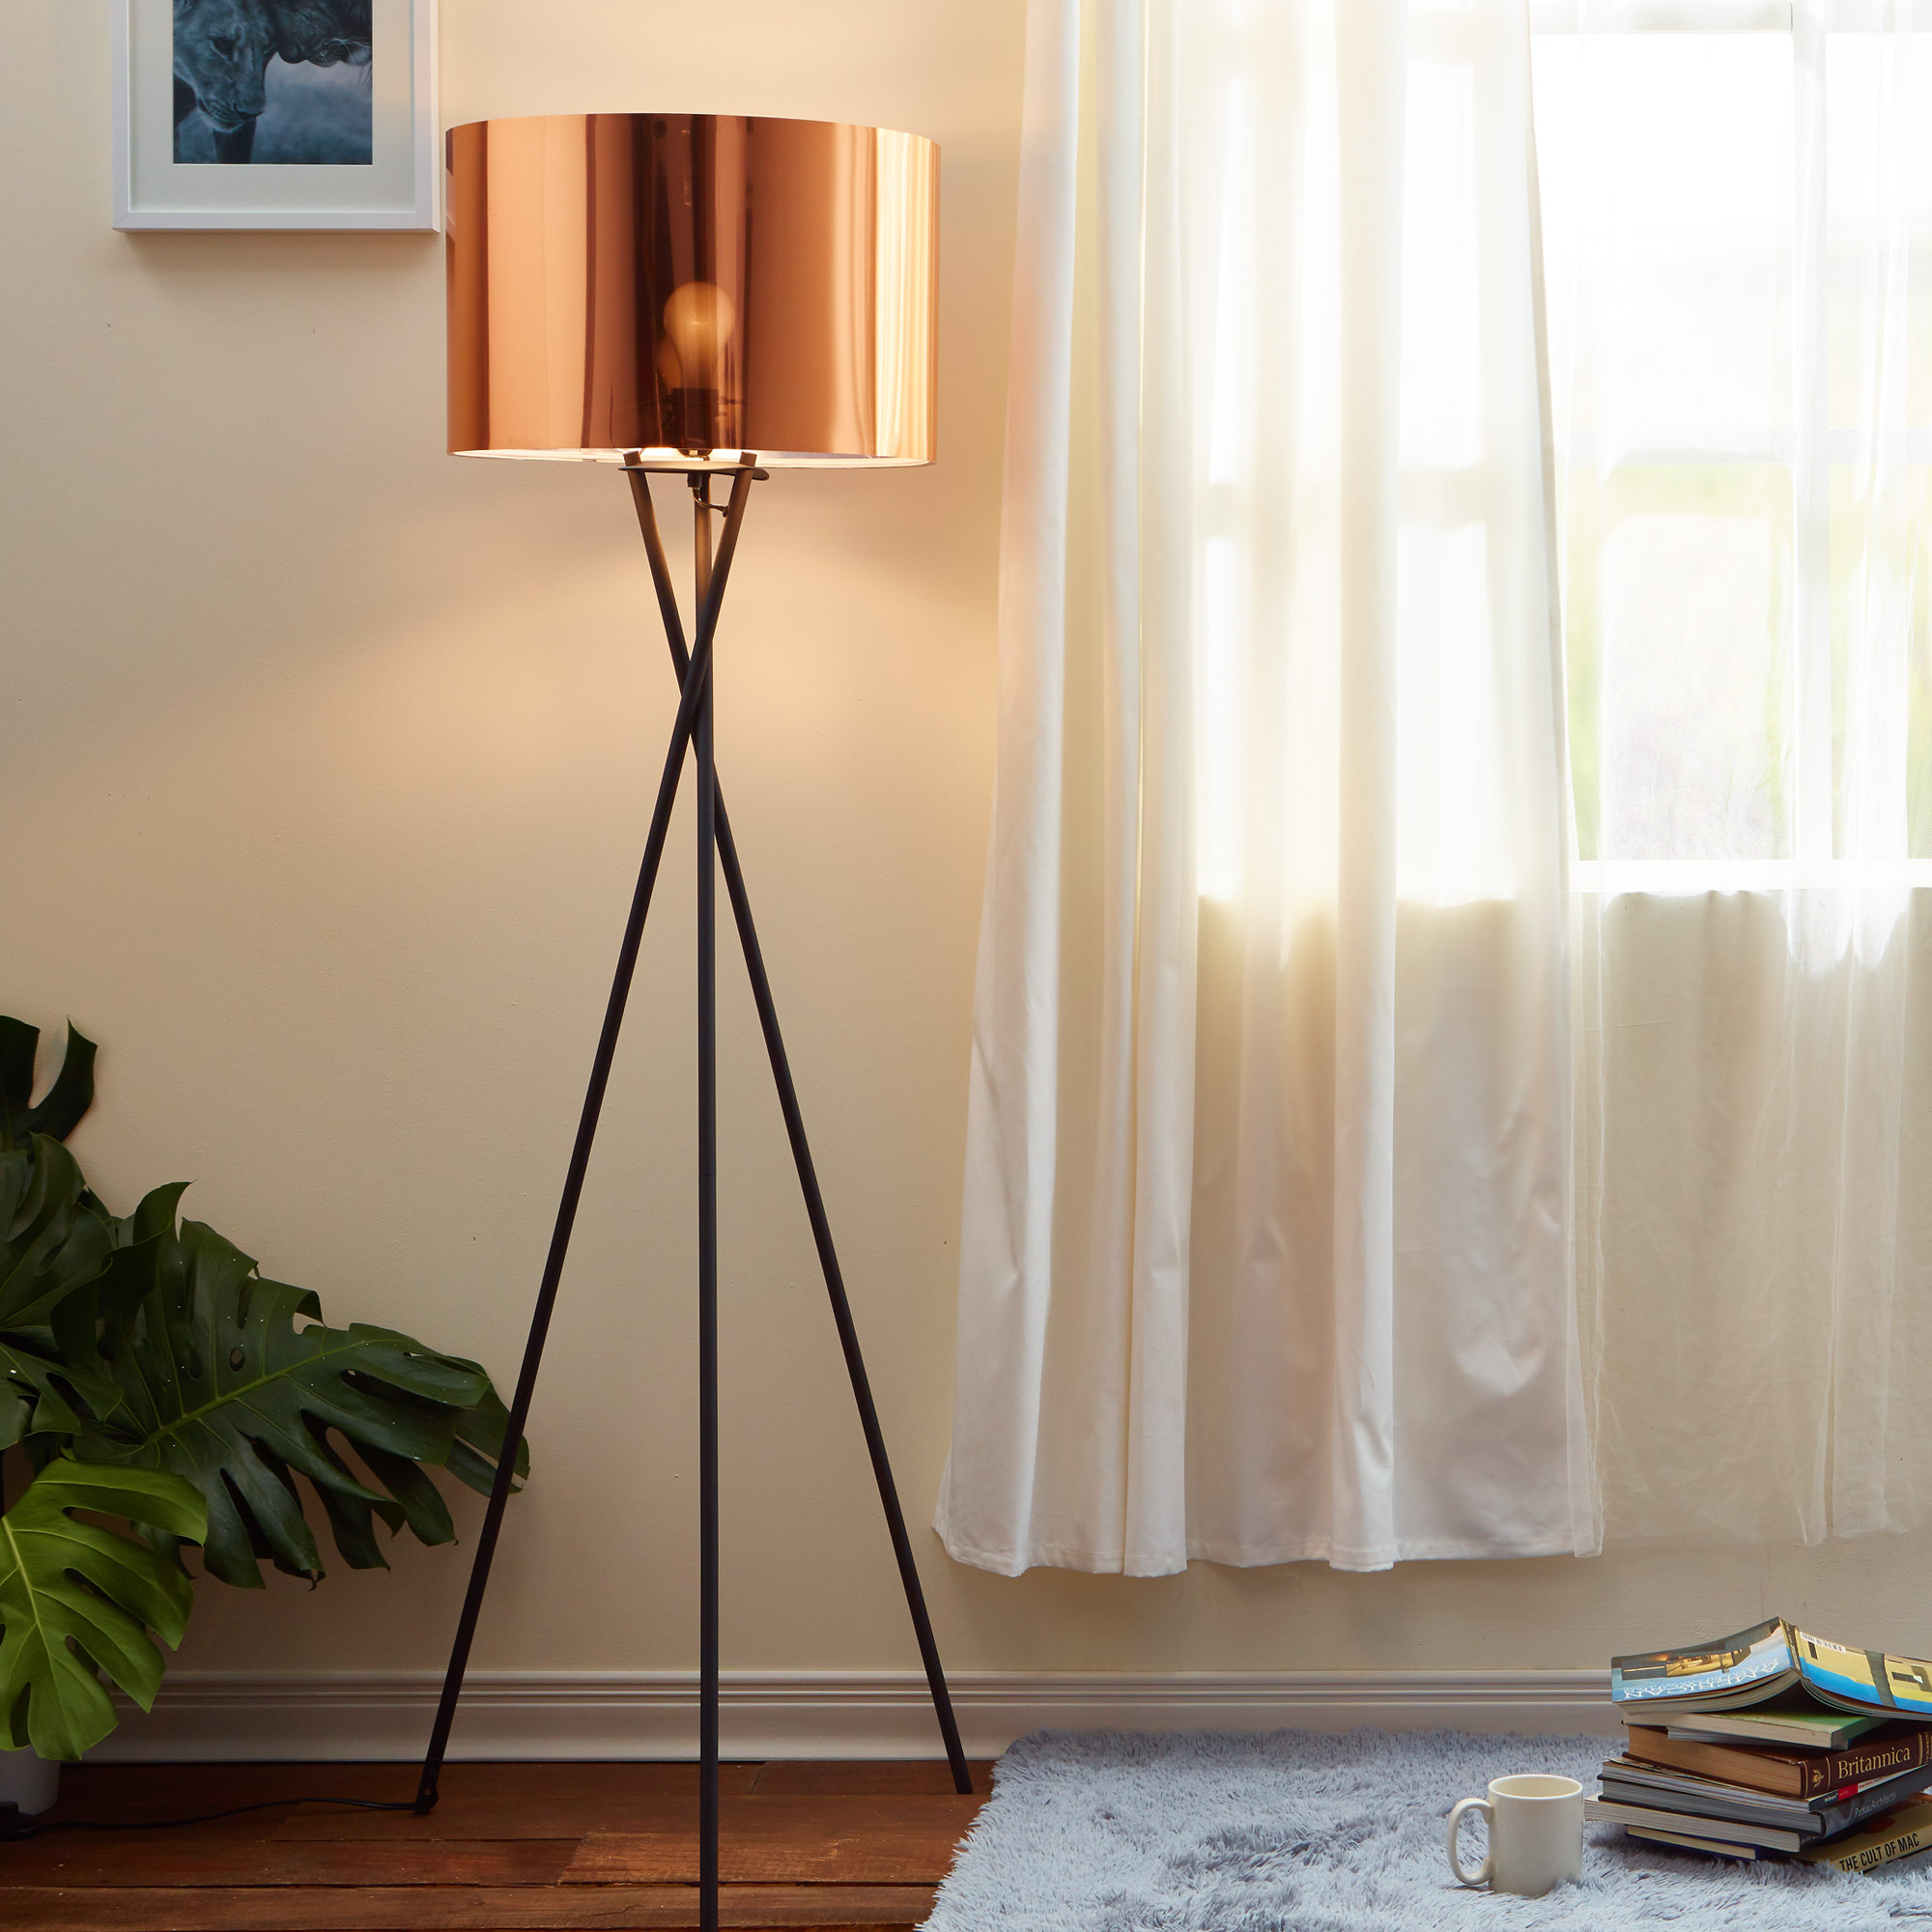 Details About Versanora Tripod Led Standard Floor Lamp Copper Shade Modern Lighting Vn L00002 in sizing 2000 X 2000